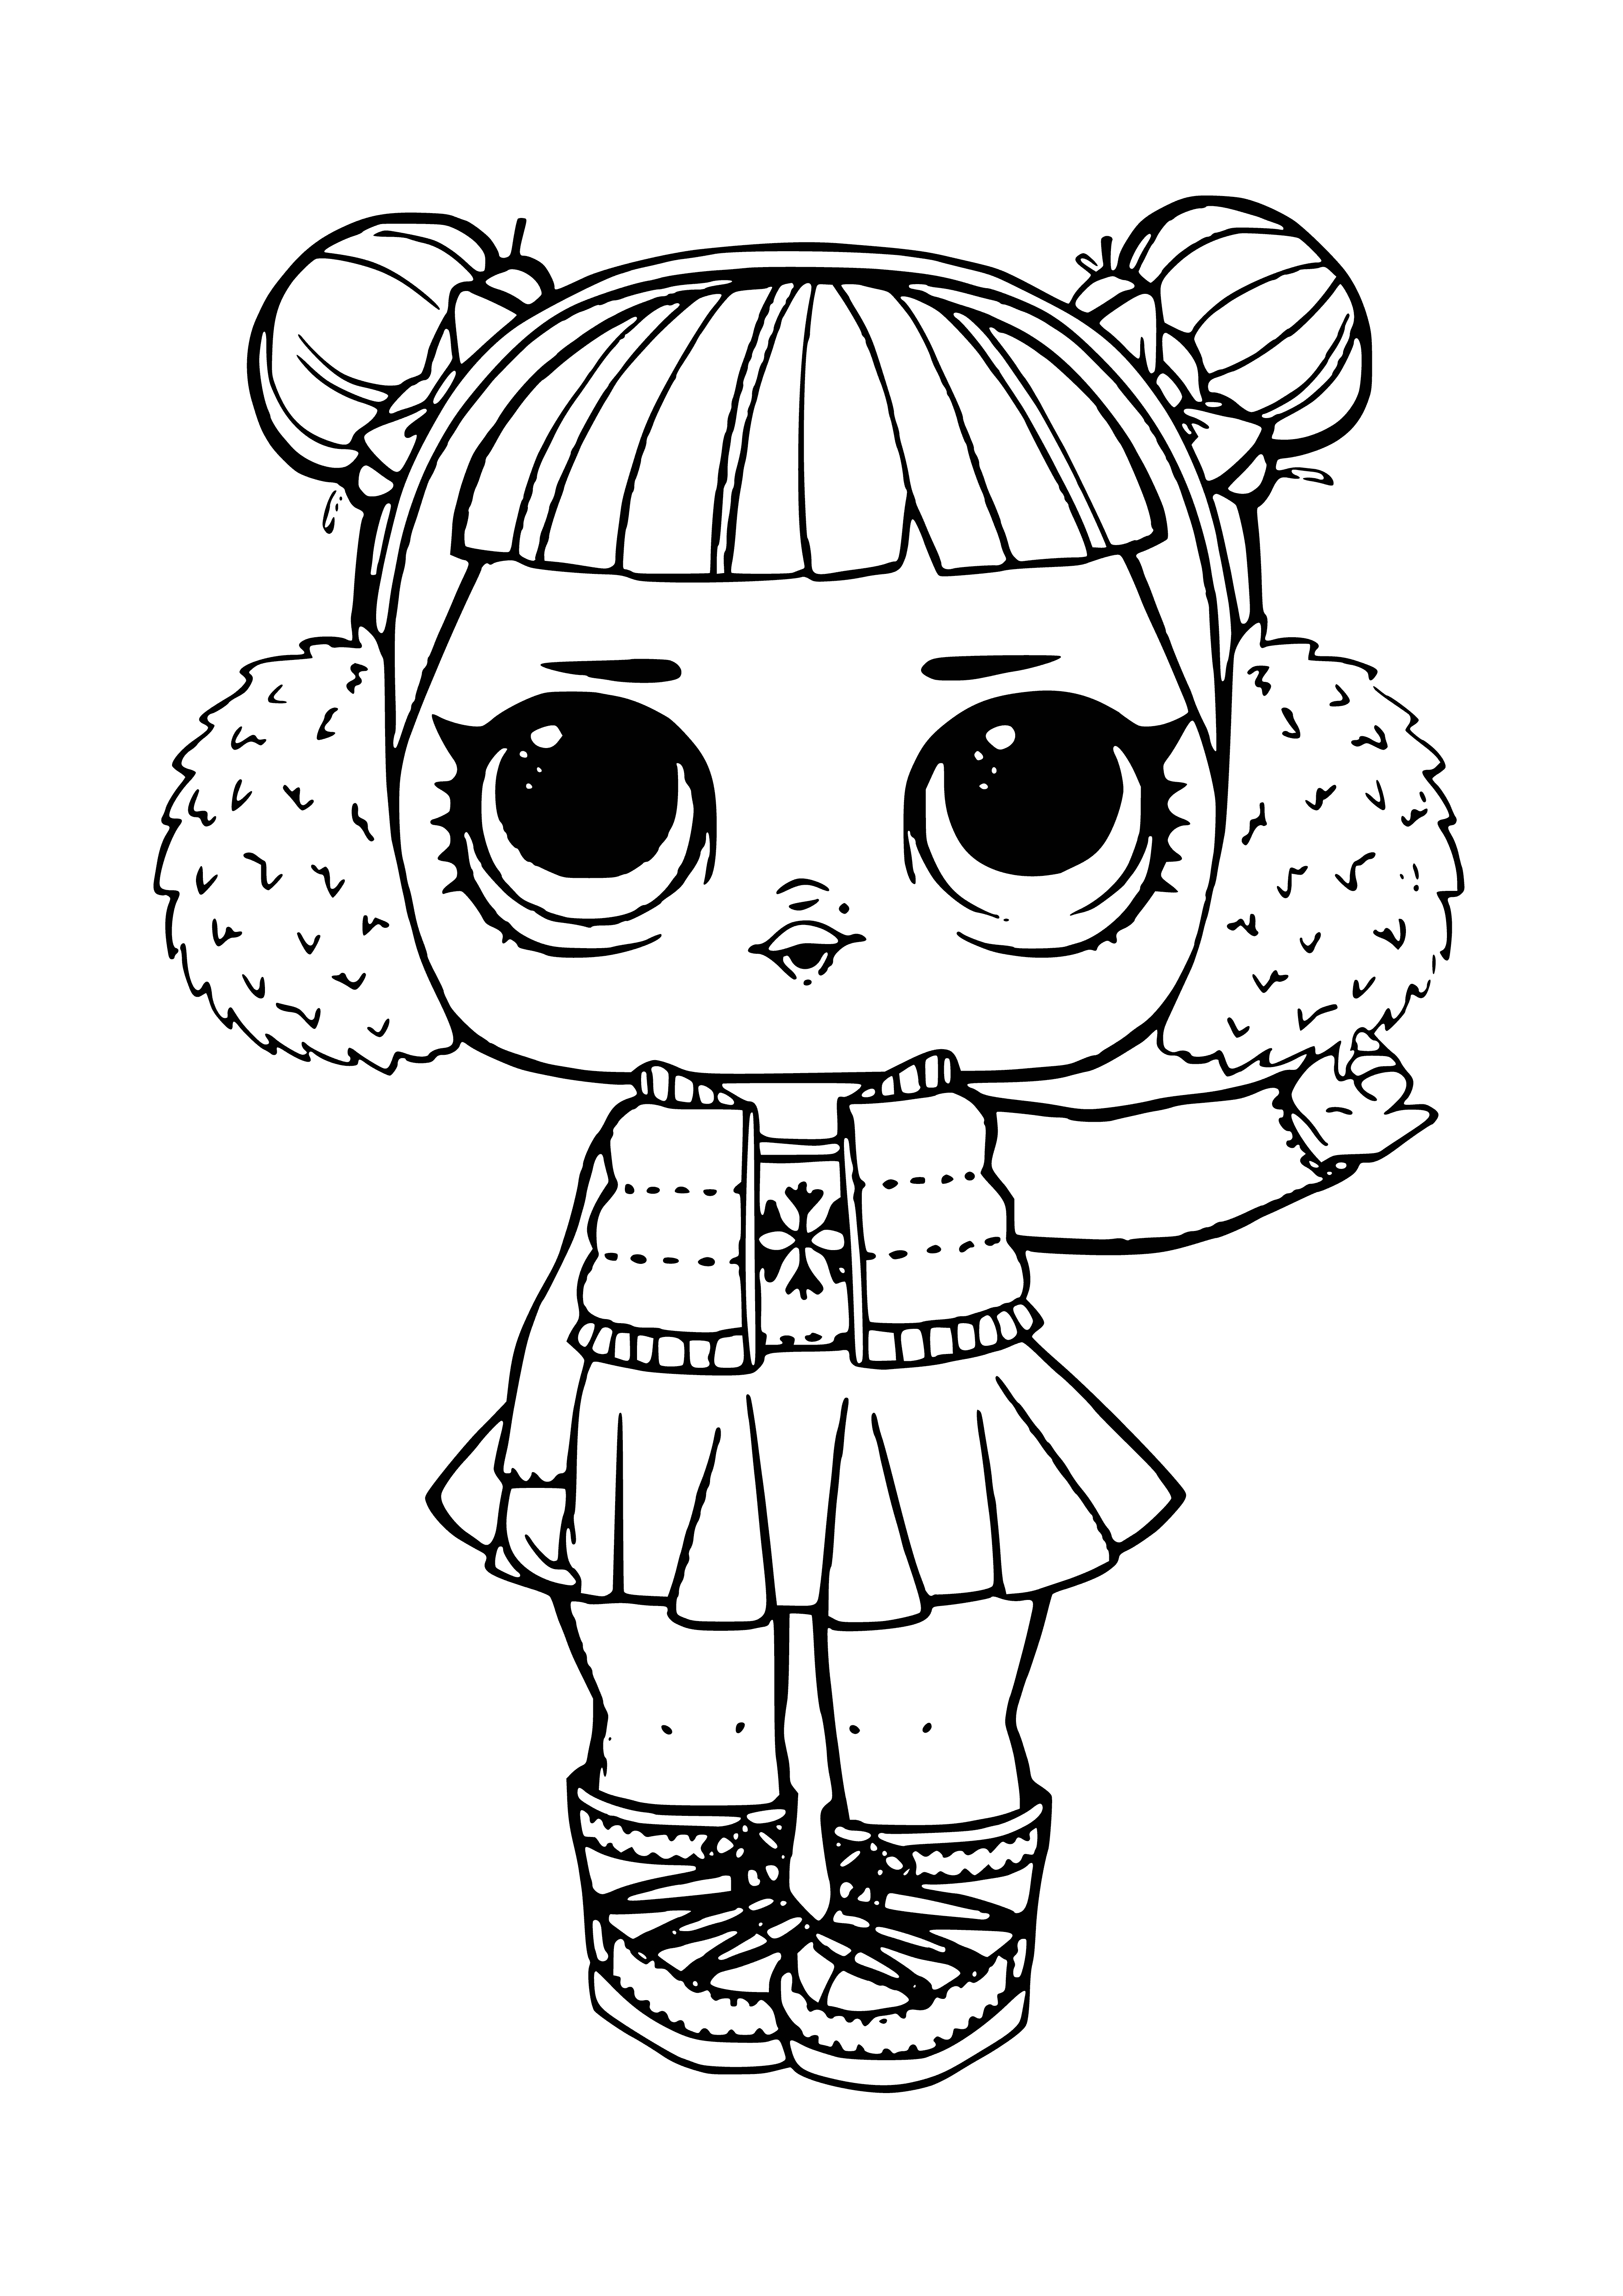 coloring page: Girl figurine with light blue dress & furry collar stands in center of snowy coloring page; small coloring pages of other LOL Snow Angels & diagram for assembly surround her.